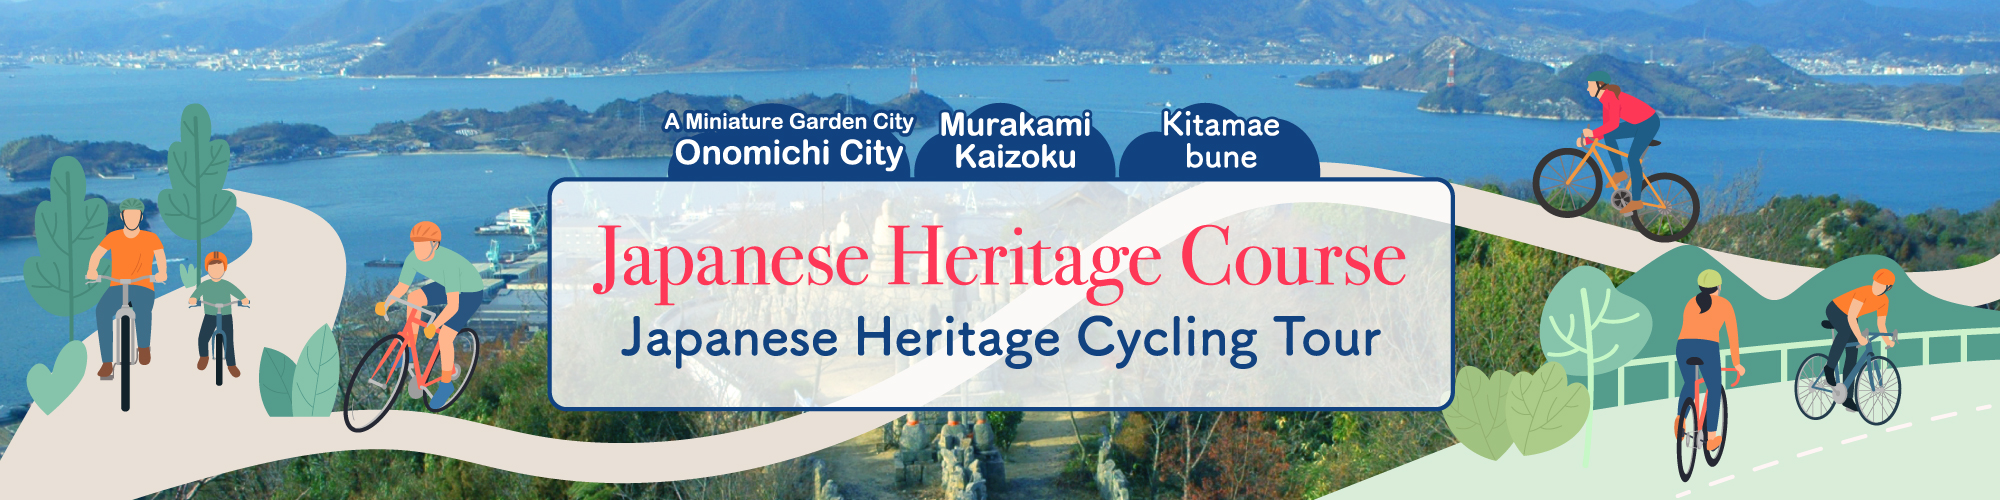 Japanese Heritage Course.Japanese Heritage Cycling Tour